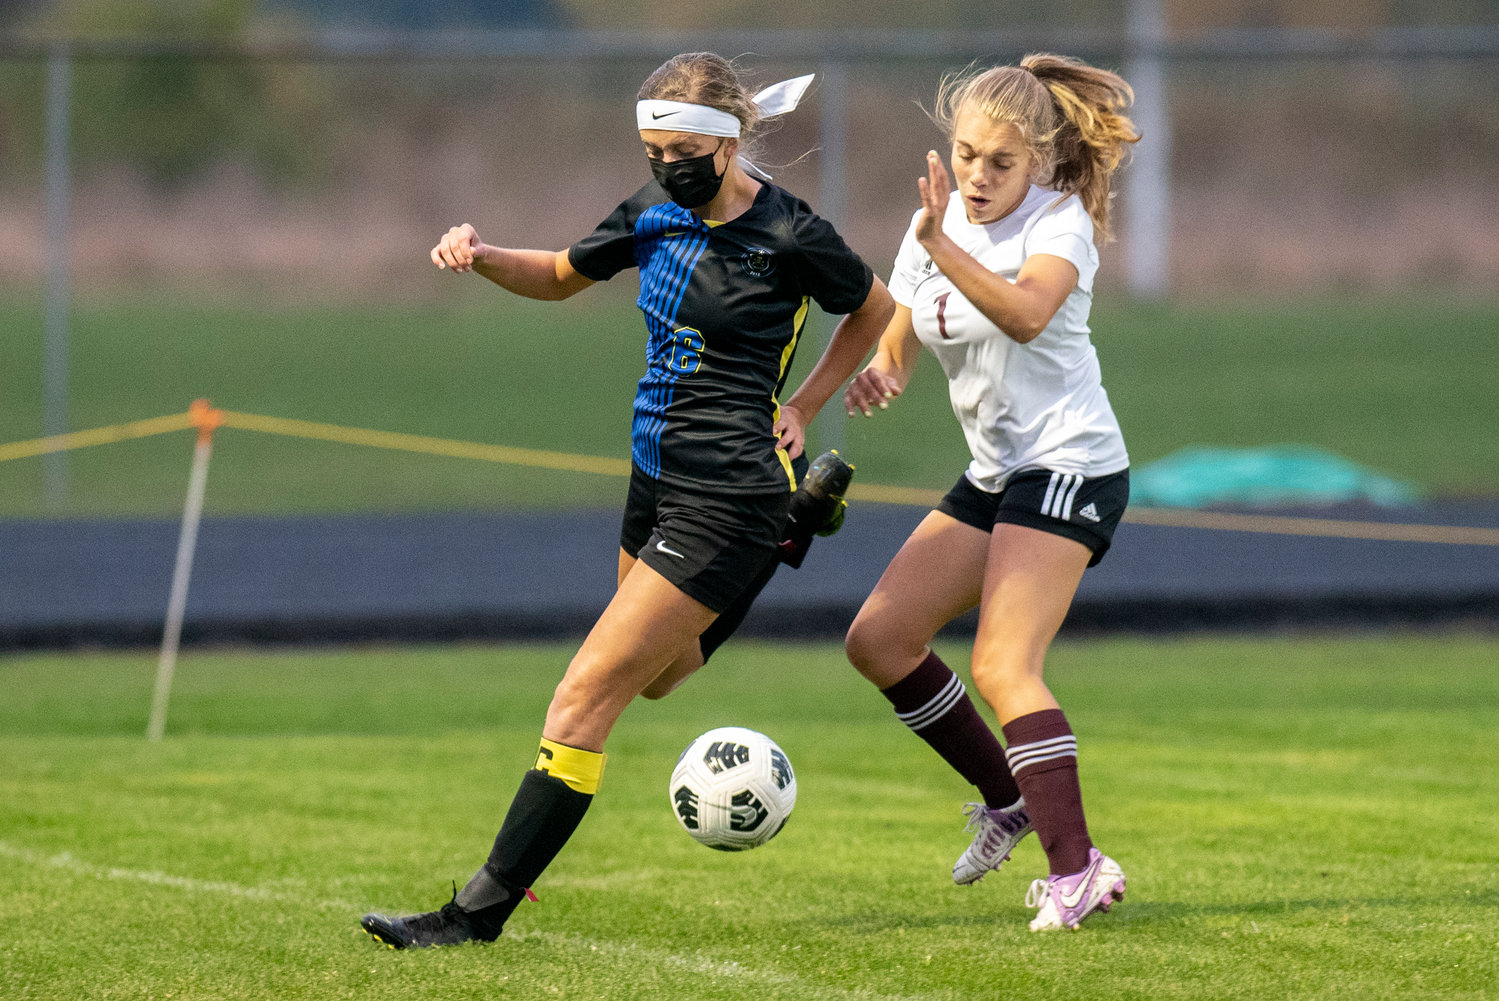 Adna's Madi Stark (6) defends against Raymond-South Bend's Ellie Capps (1) on Oct. 13, 2021.